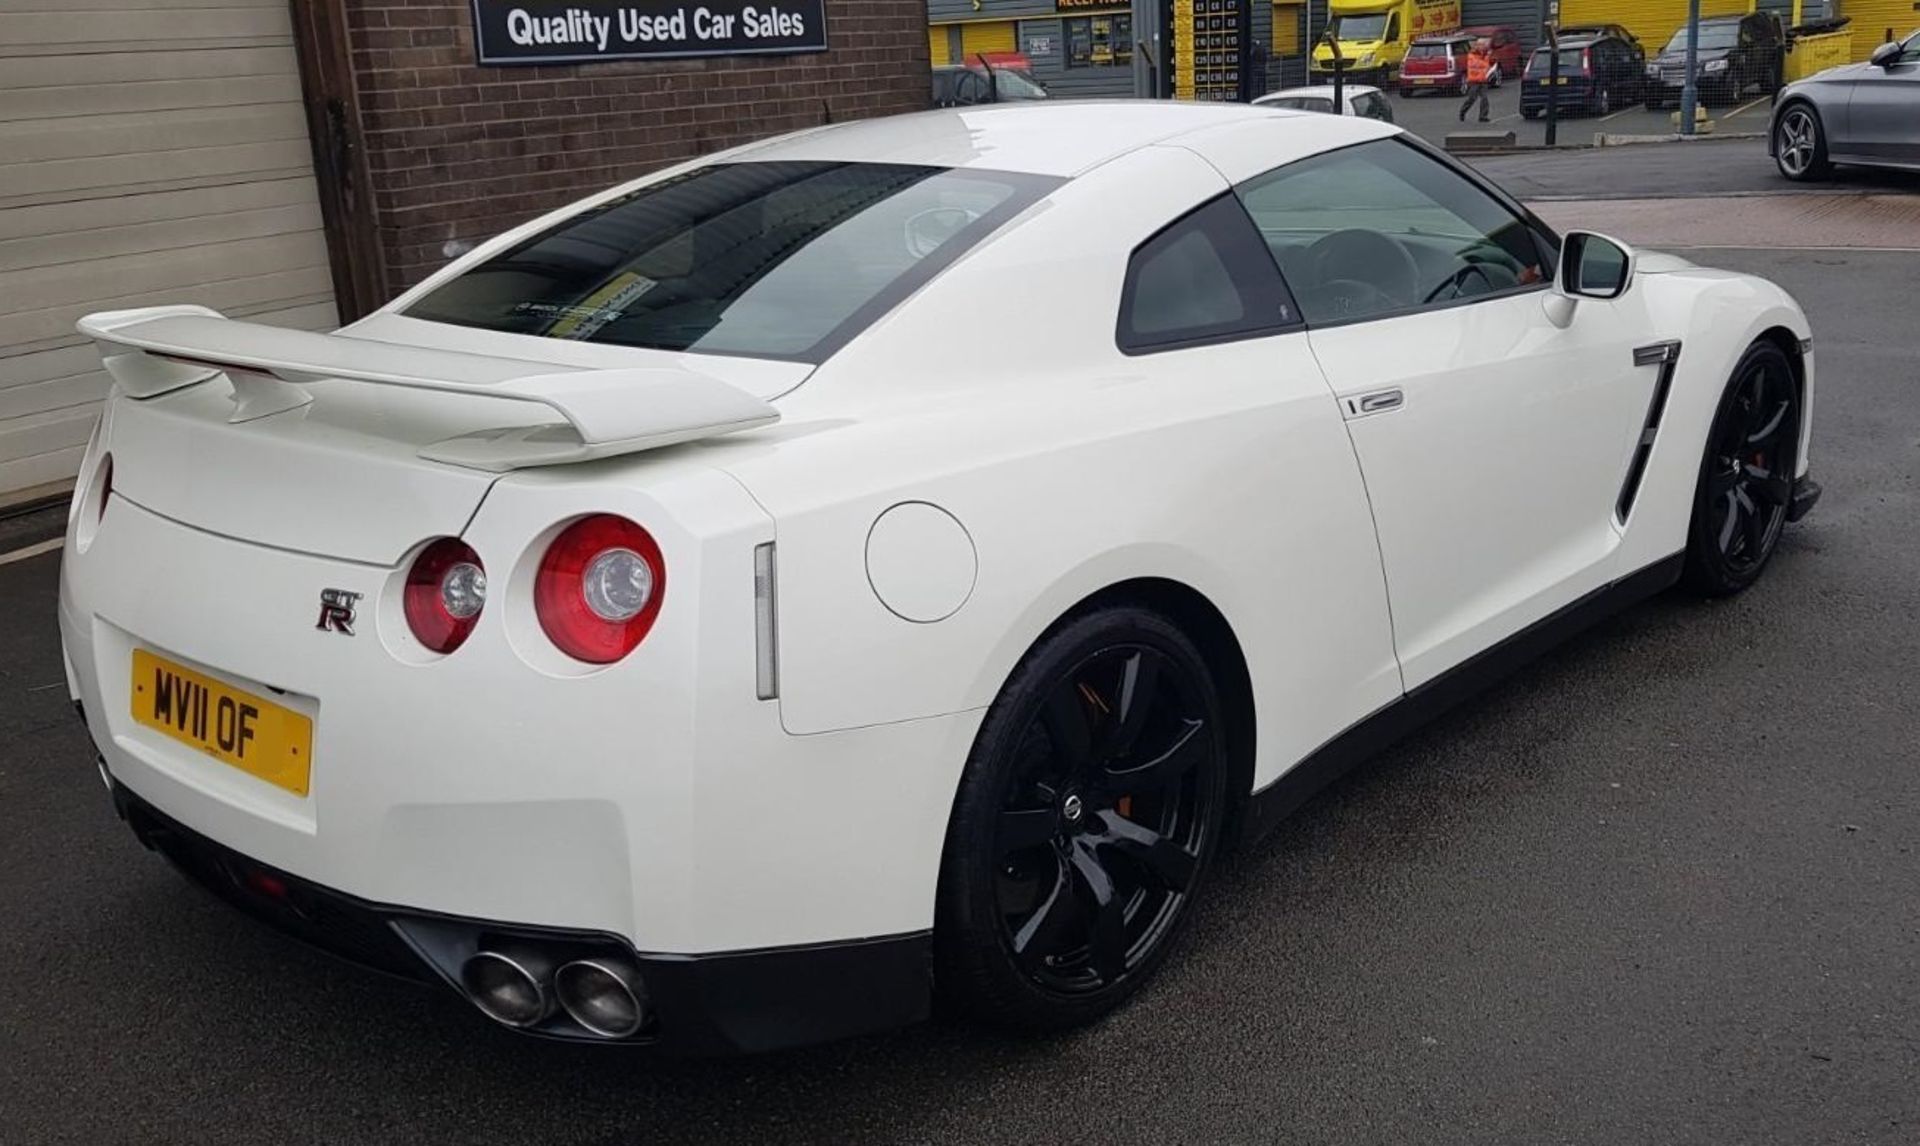 2011 NISSAN GT-R R35 750 stage 5 PREMIUM EDITION S-A 1 OWNER FROM NEW 19.5K MILES WARRANTED! no vat - Image 6 of 7